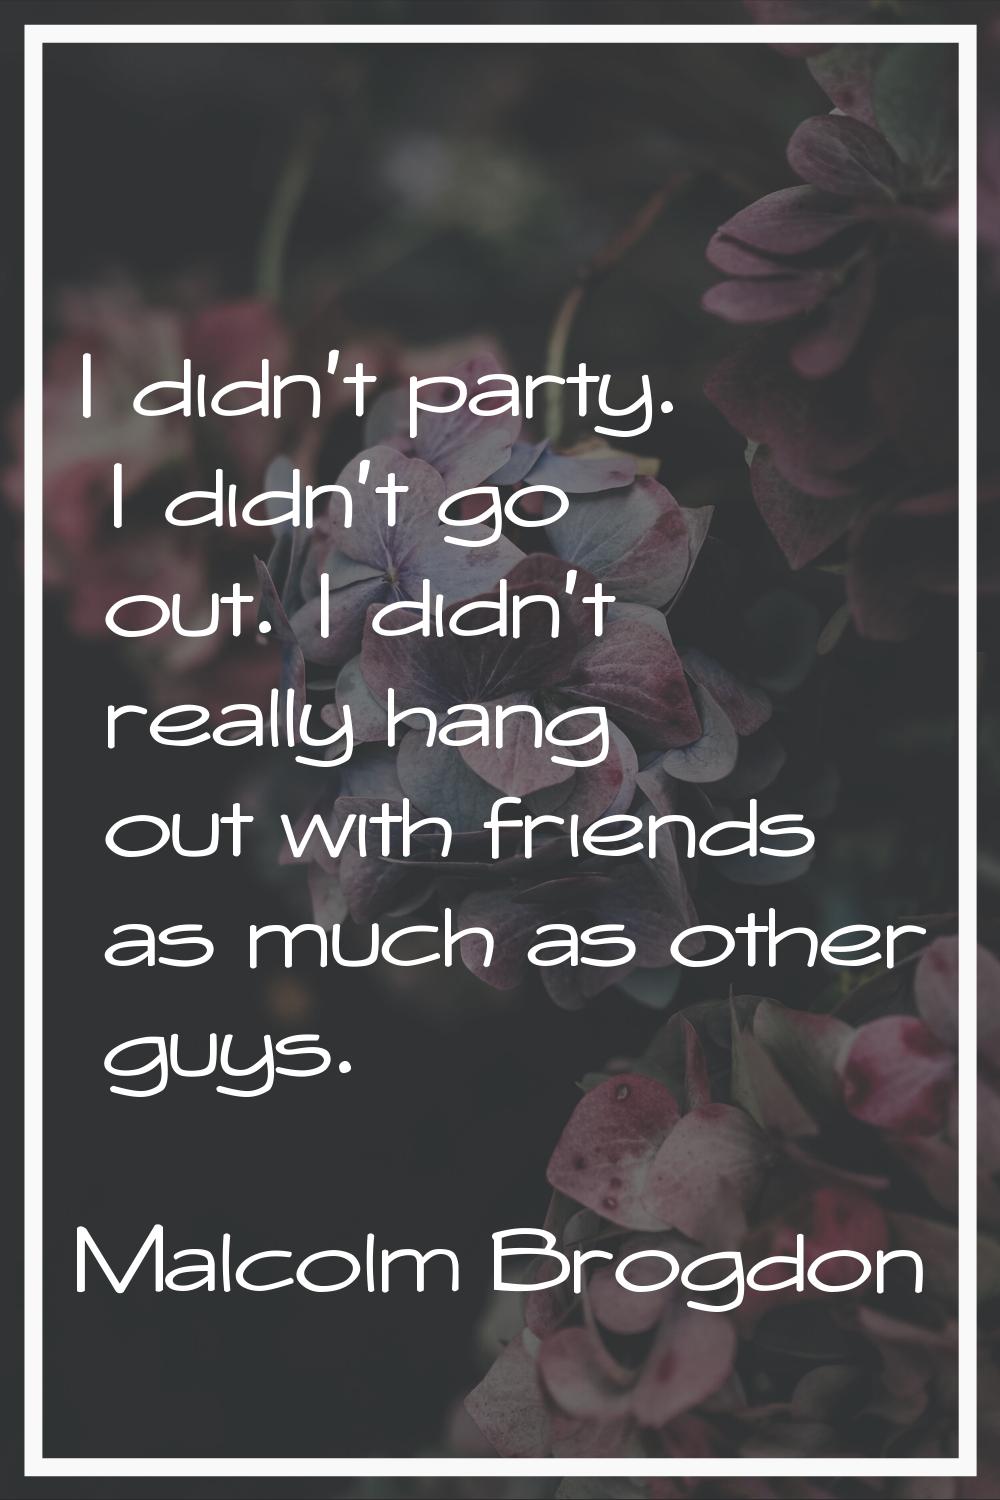 I didn't party. I didn't go out. I didn't really hang out with friends as much as other guys.